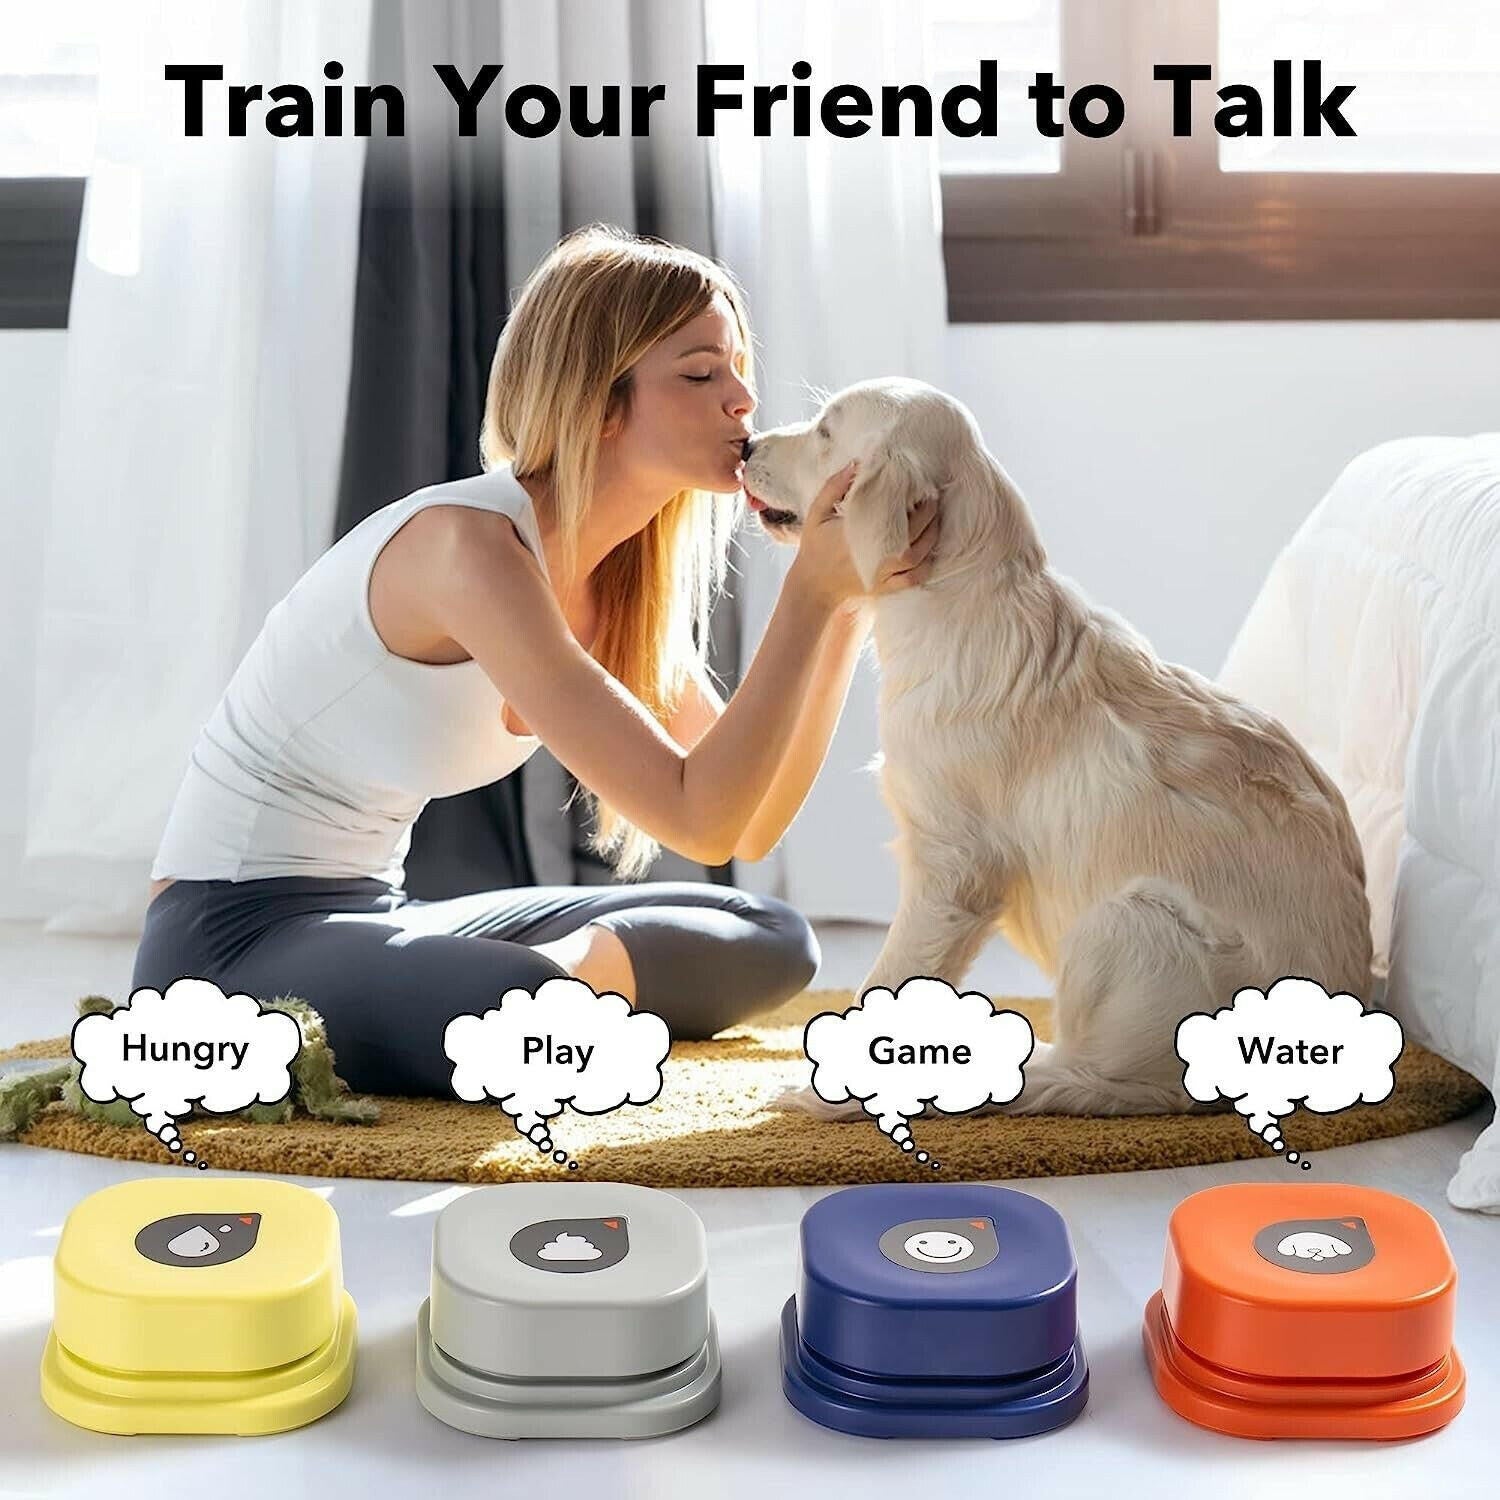 Recordable Dog Training Buttons: Set of 9 Talking Buttons